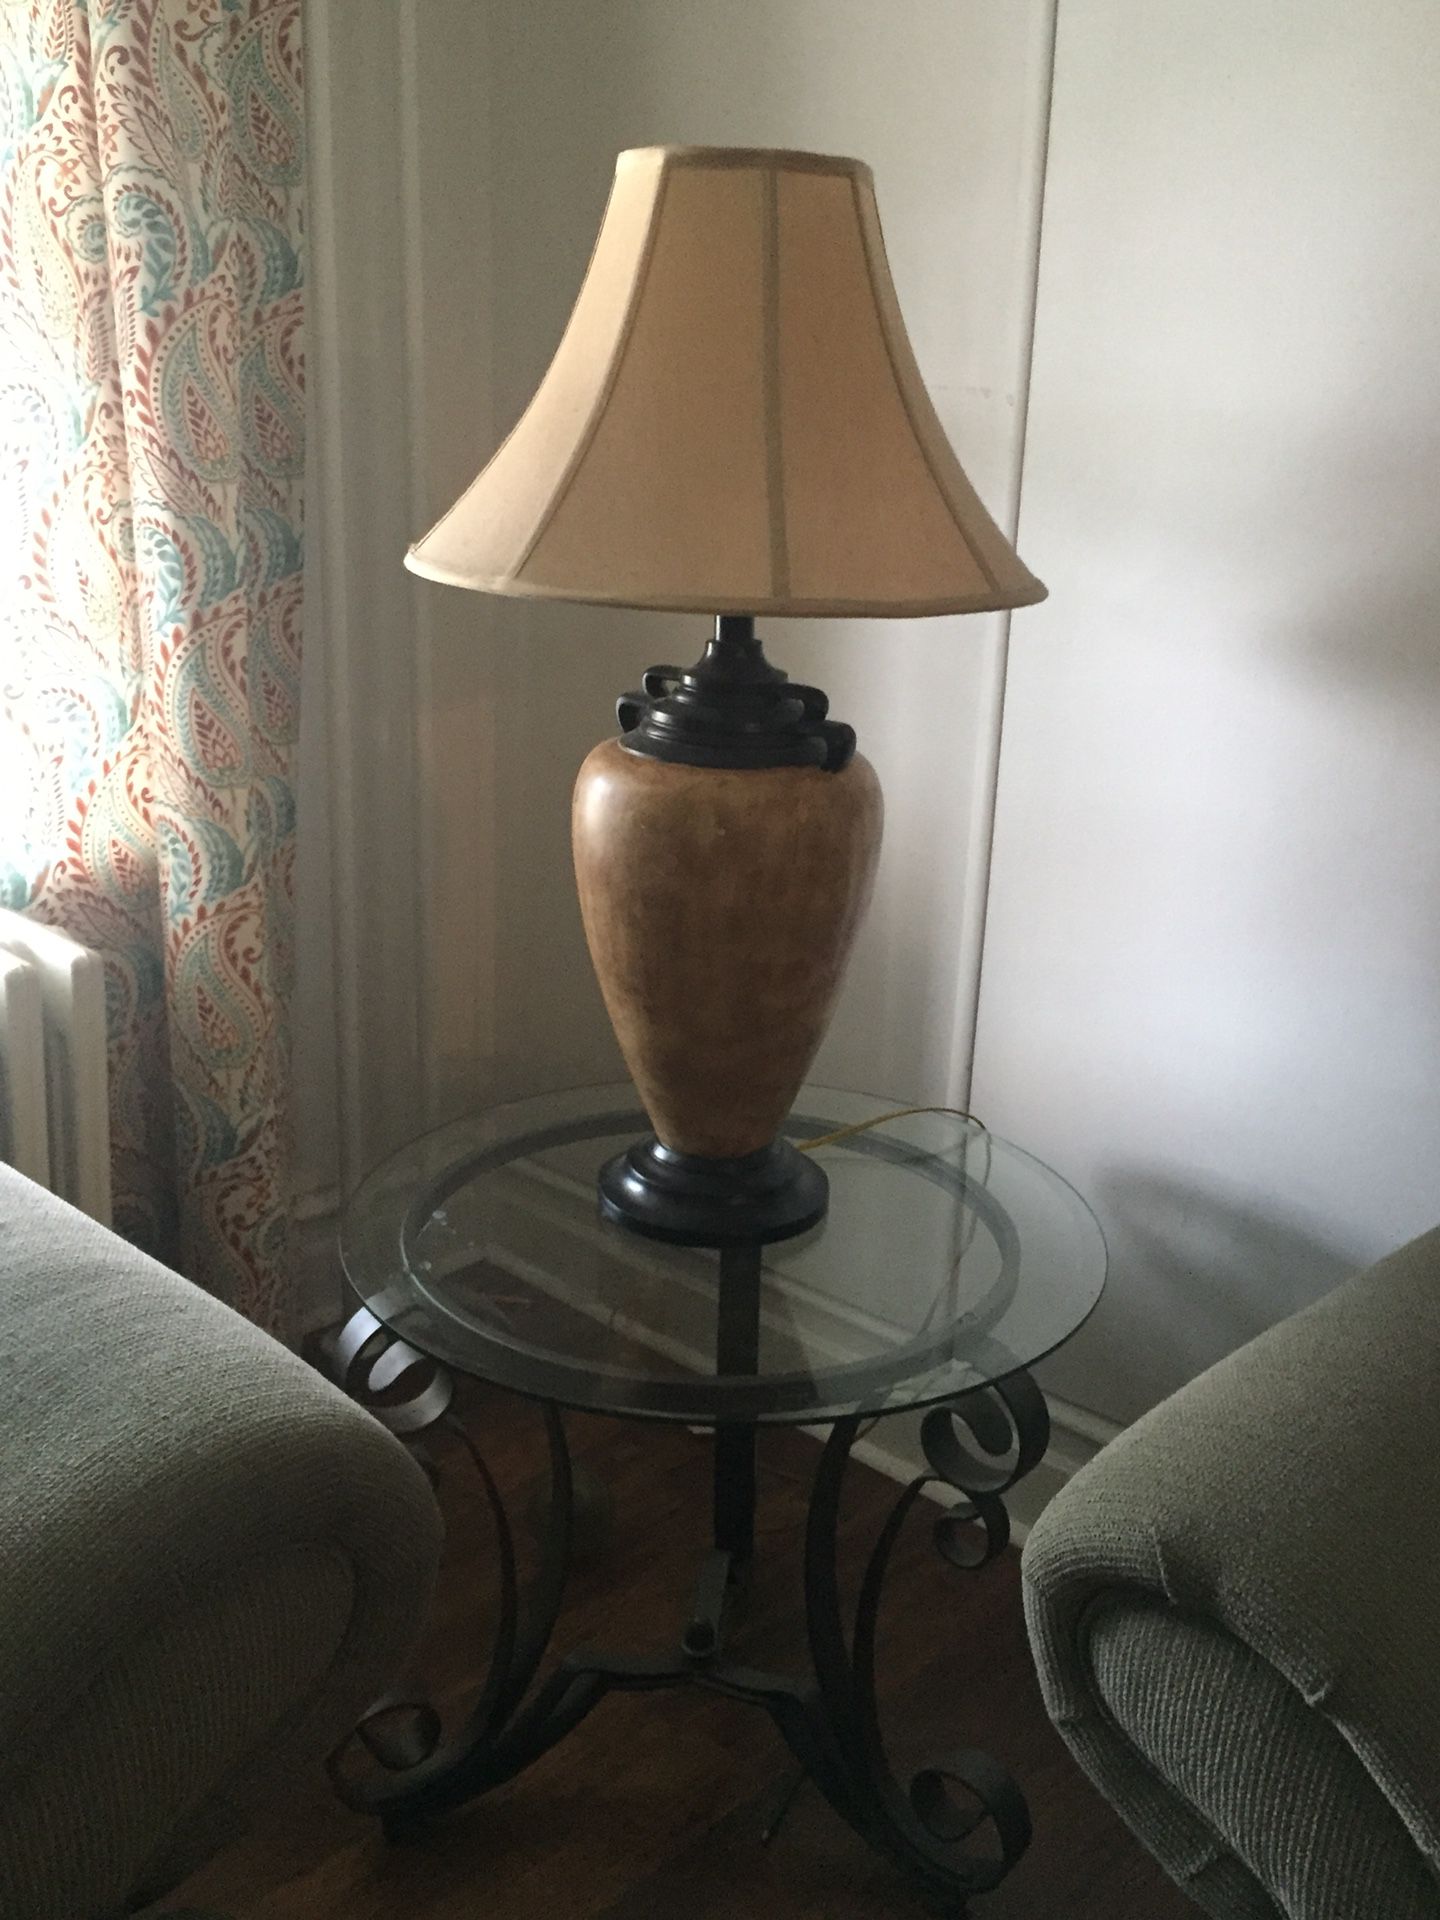 Marble like lamps. Antique look. Used but in very well condition.